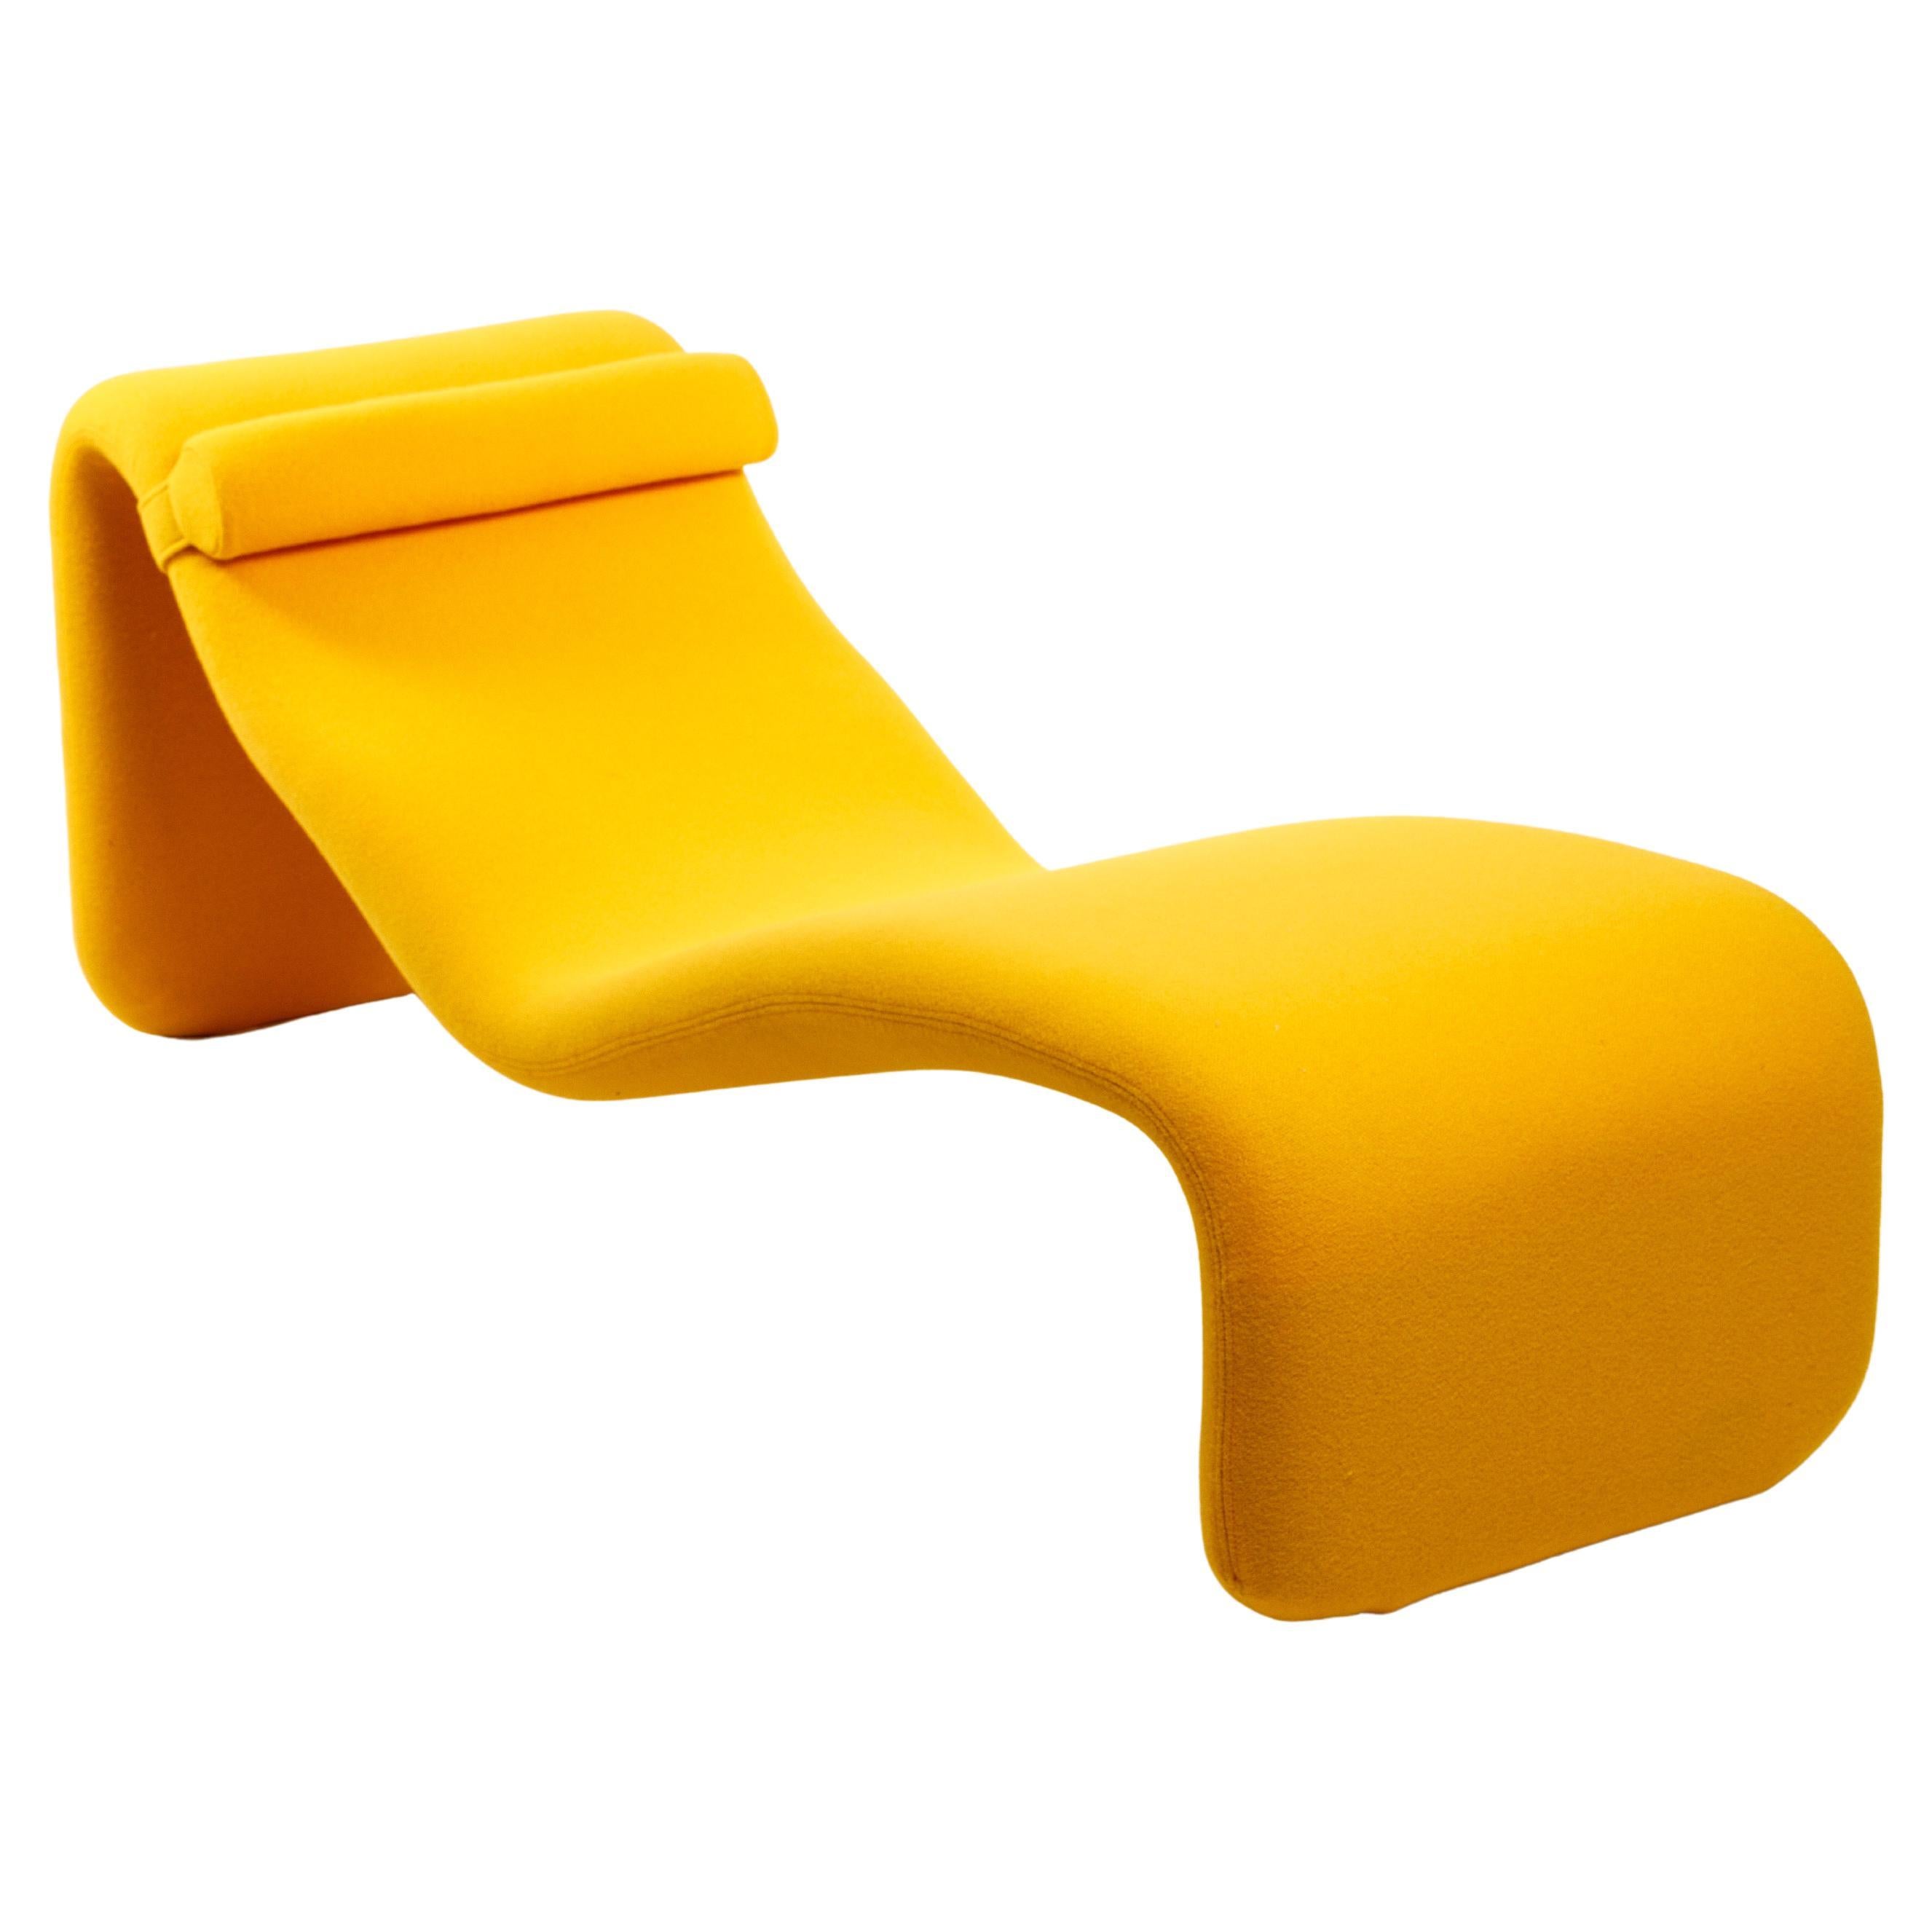 Olivier Mourgue emblematic Djinn Chaise Longue for Airborne 